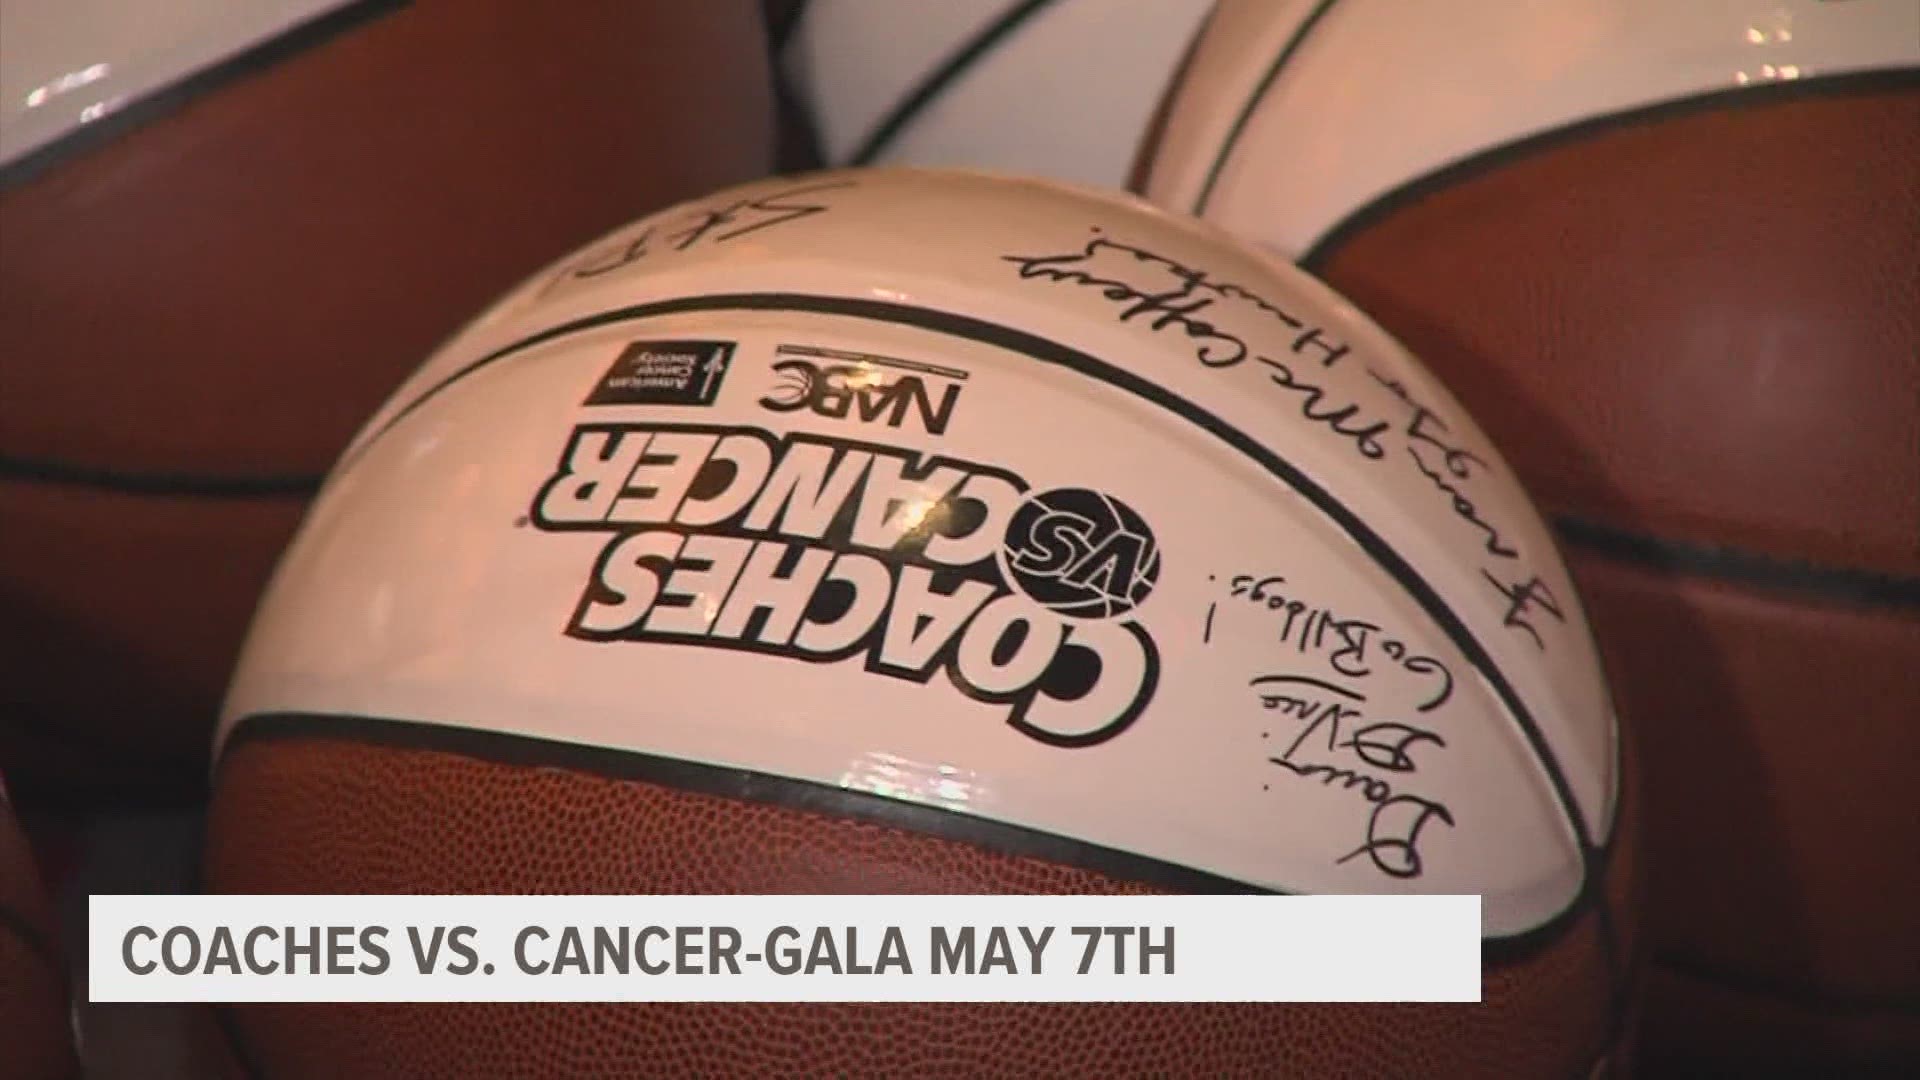 It's the annual Coaches vs. Cancer Gala and just because they are virtual again doesn't mean the fight against cancer slows down.